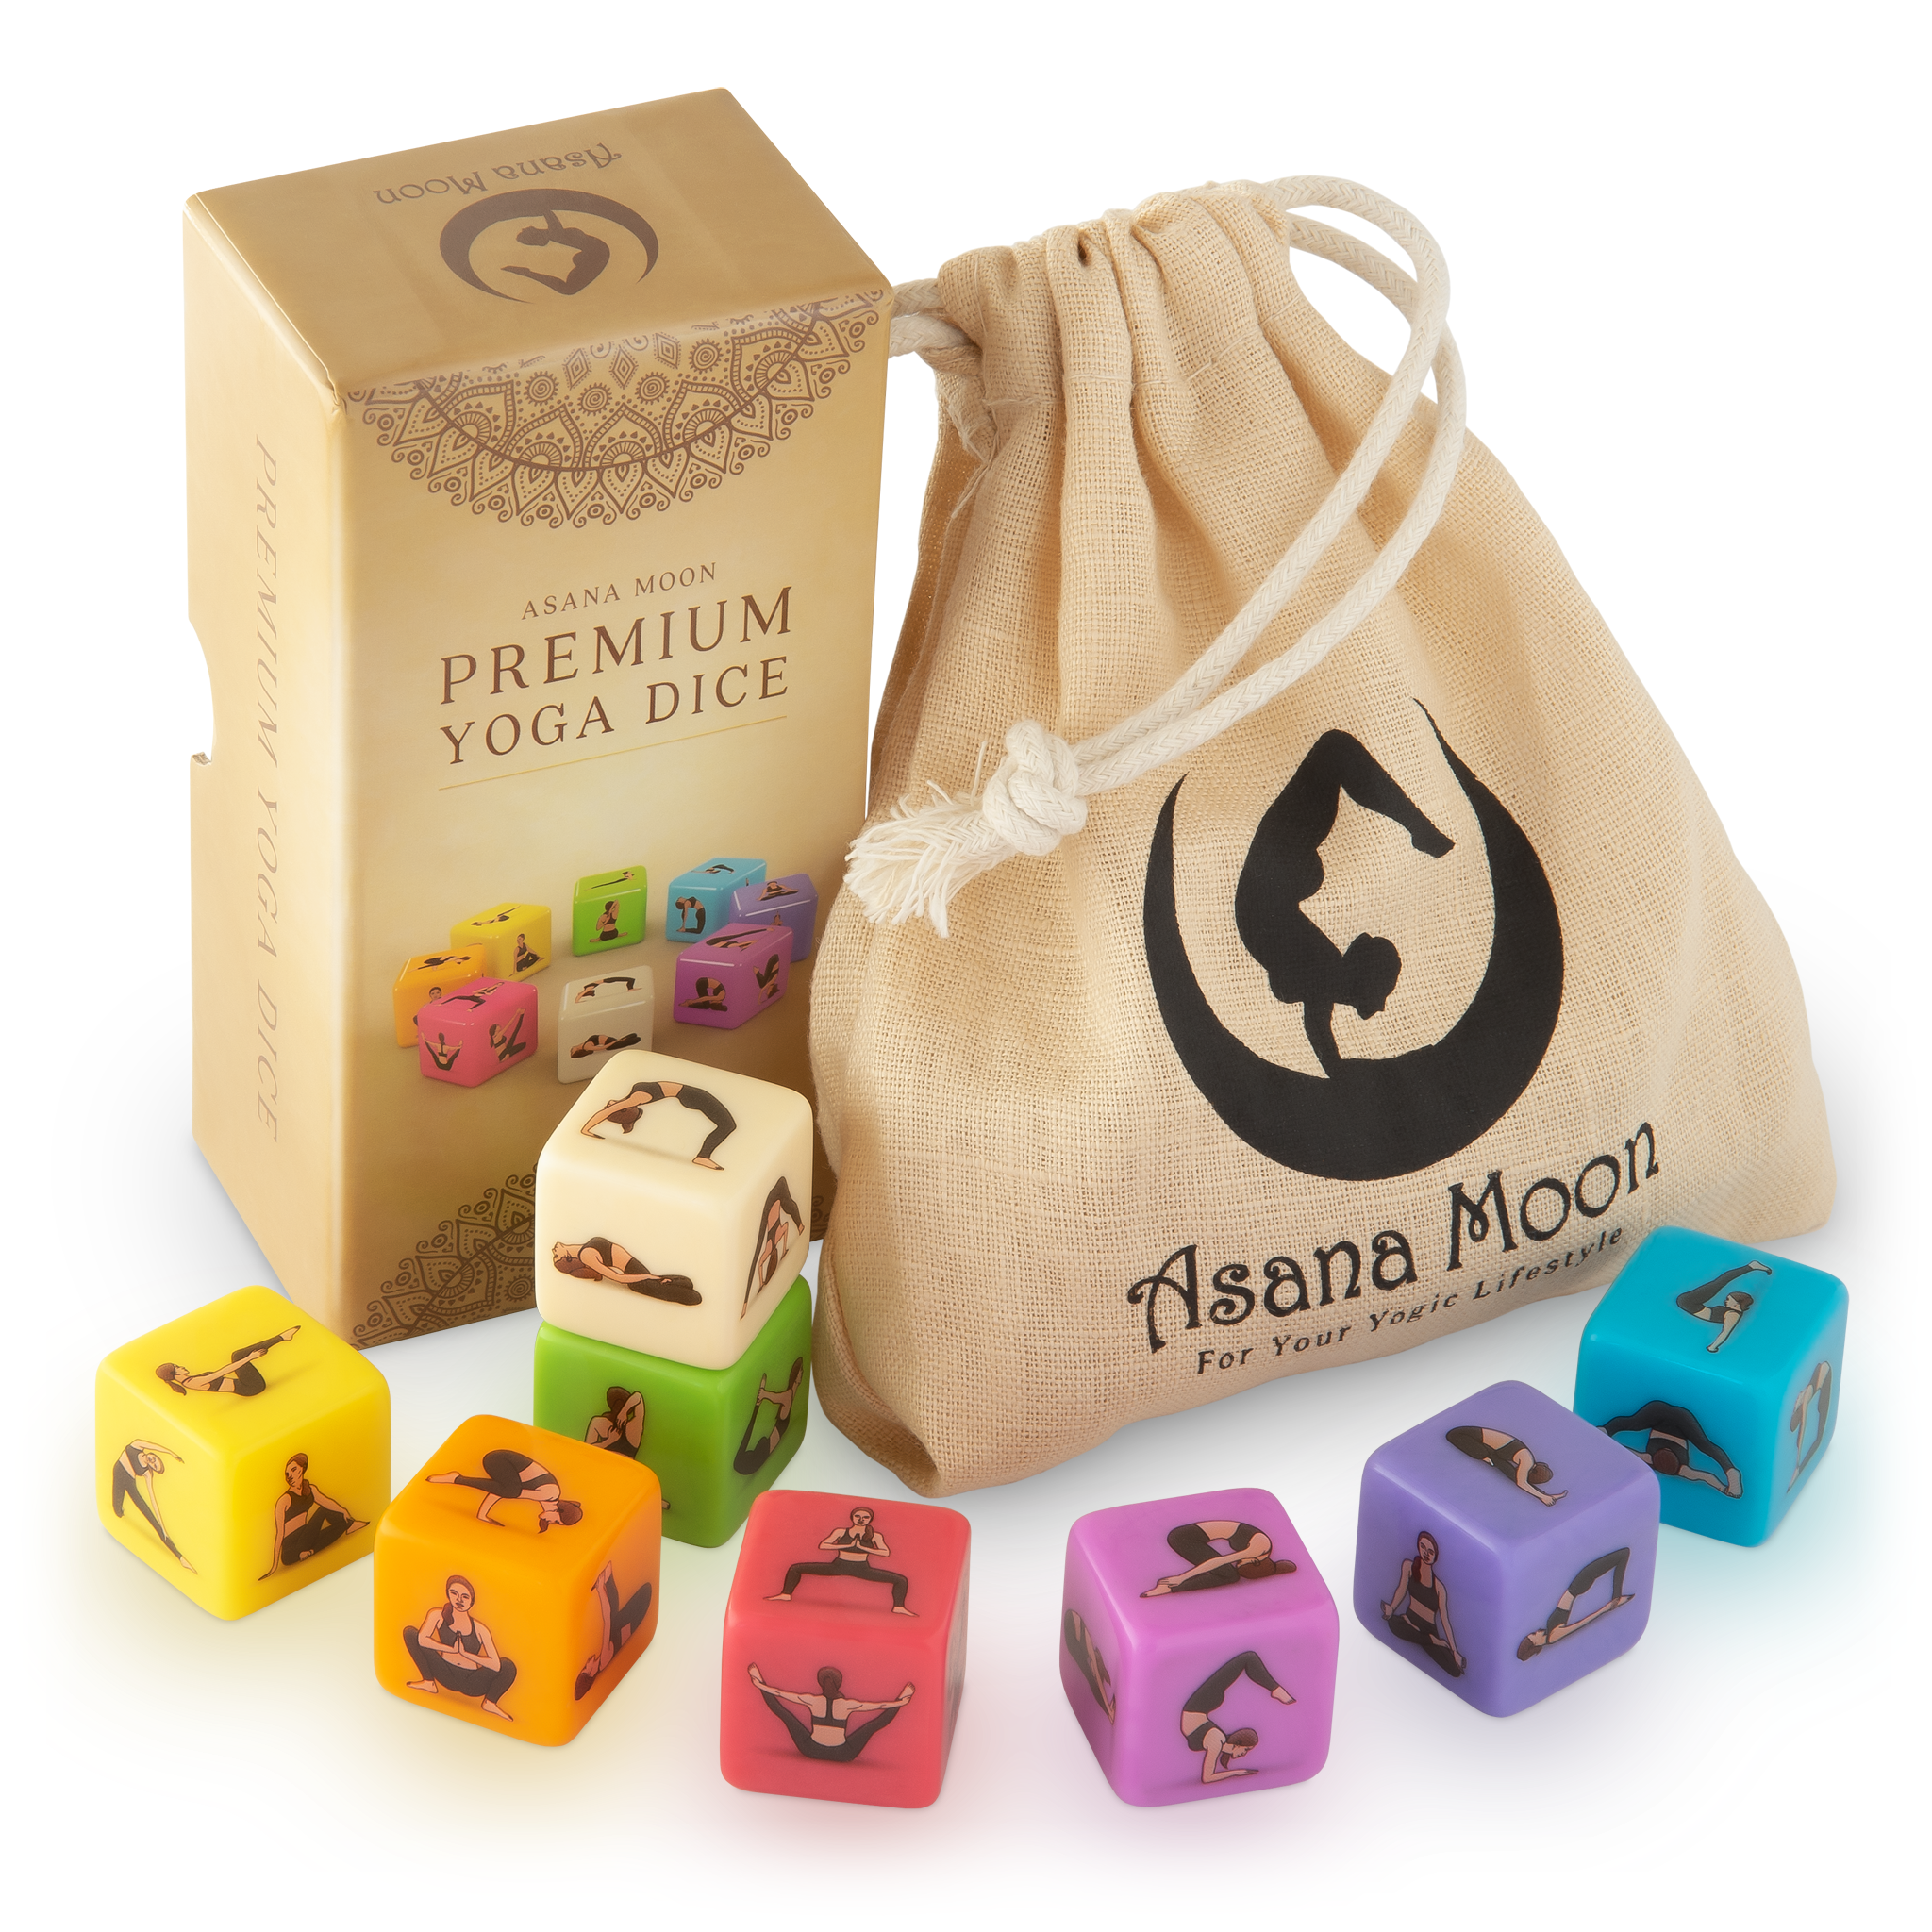 8-pc Wood Yoga Dice Set - Creative Yoga Accessories and Fun Yoga Gifts for  Women - Wooden Workout Dice & Fitness Dice to Create Yoga Flows in Seconds